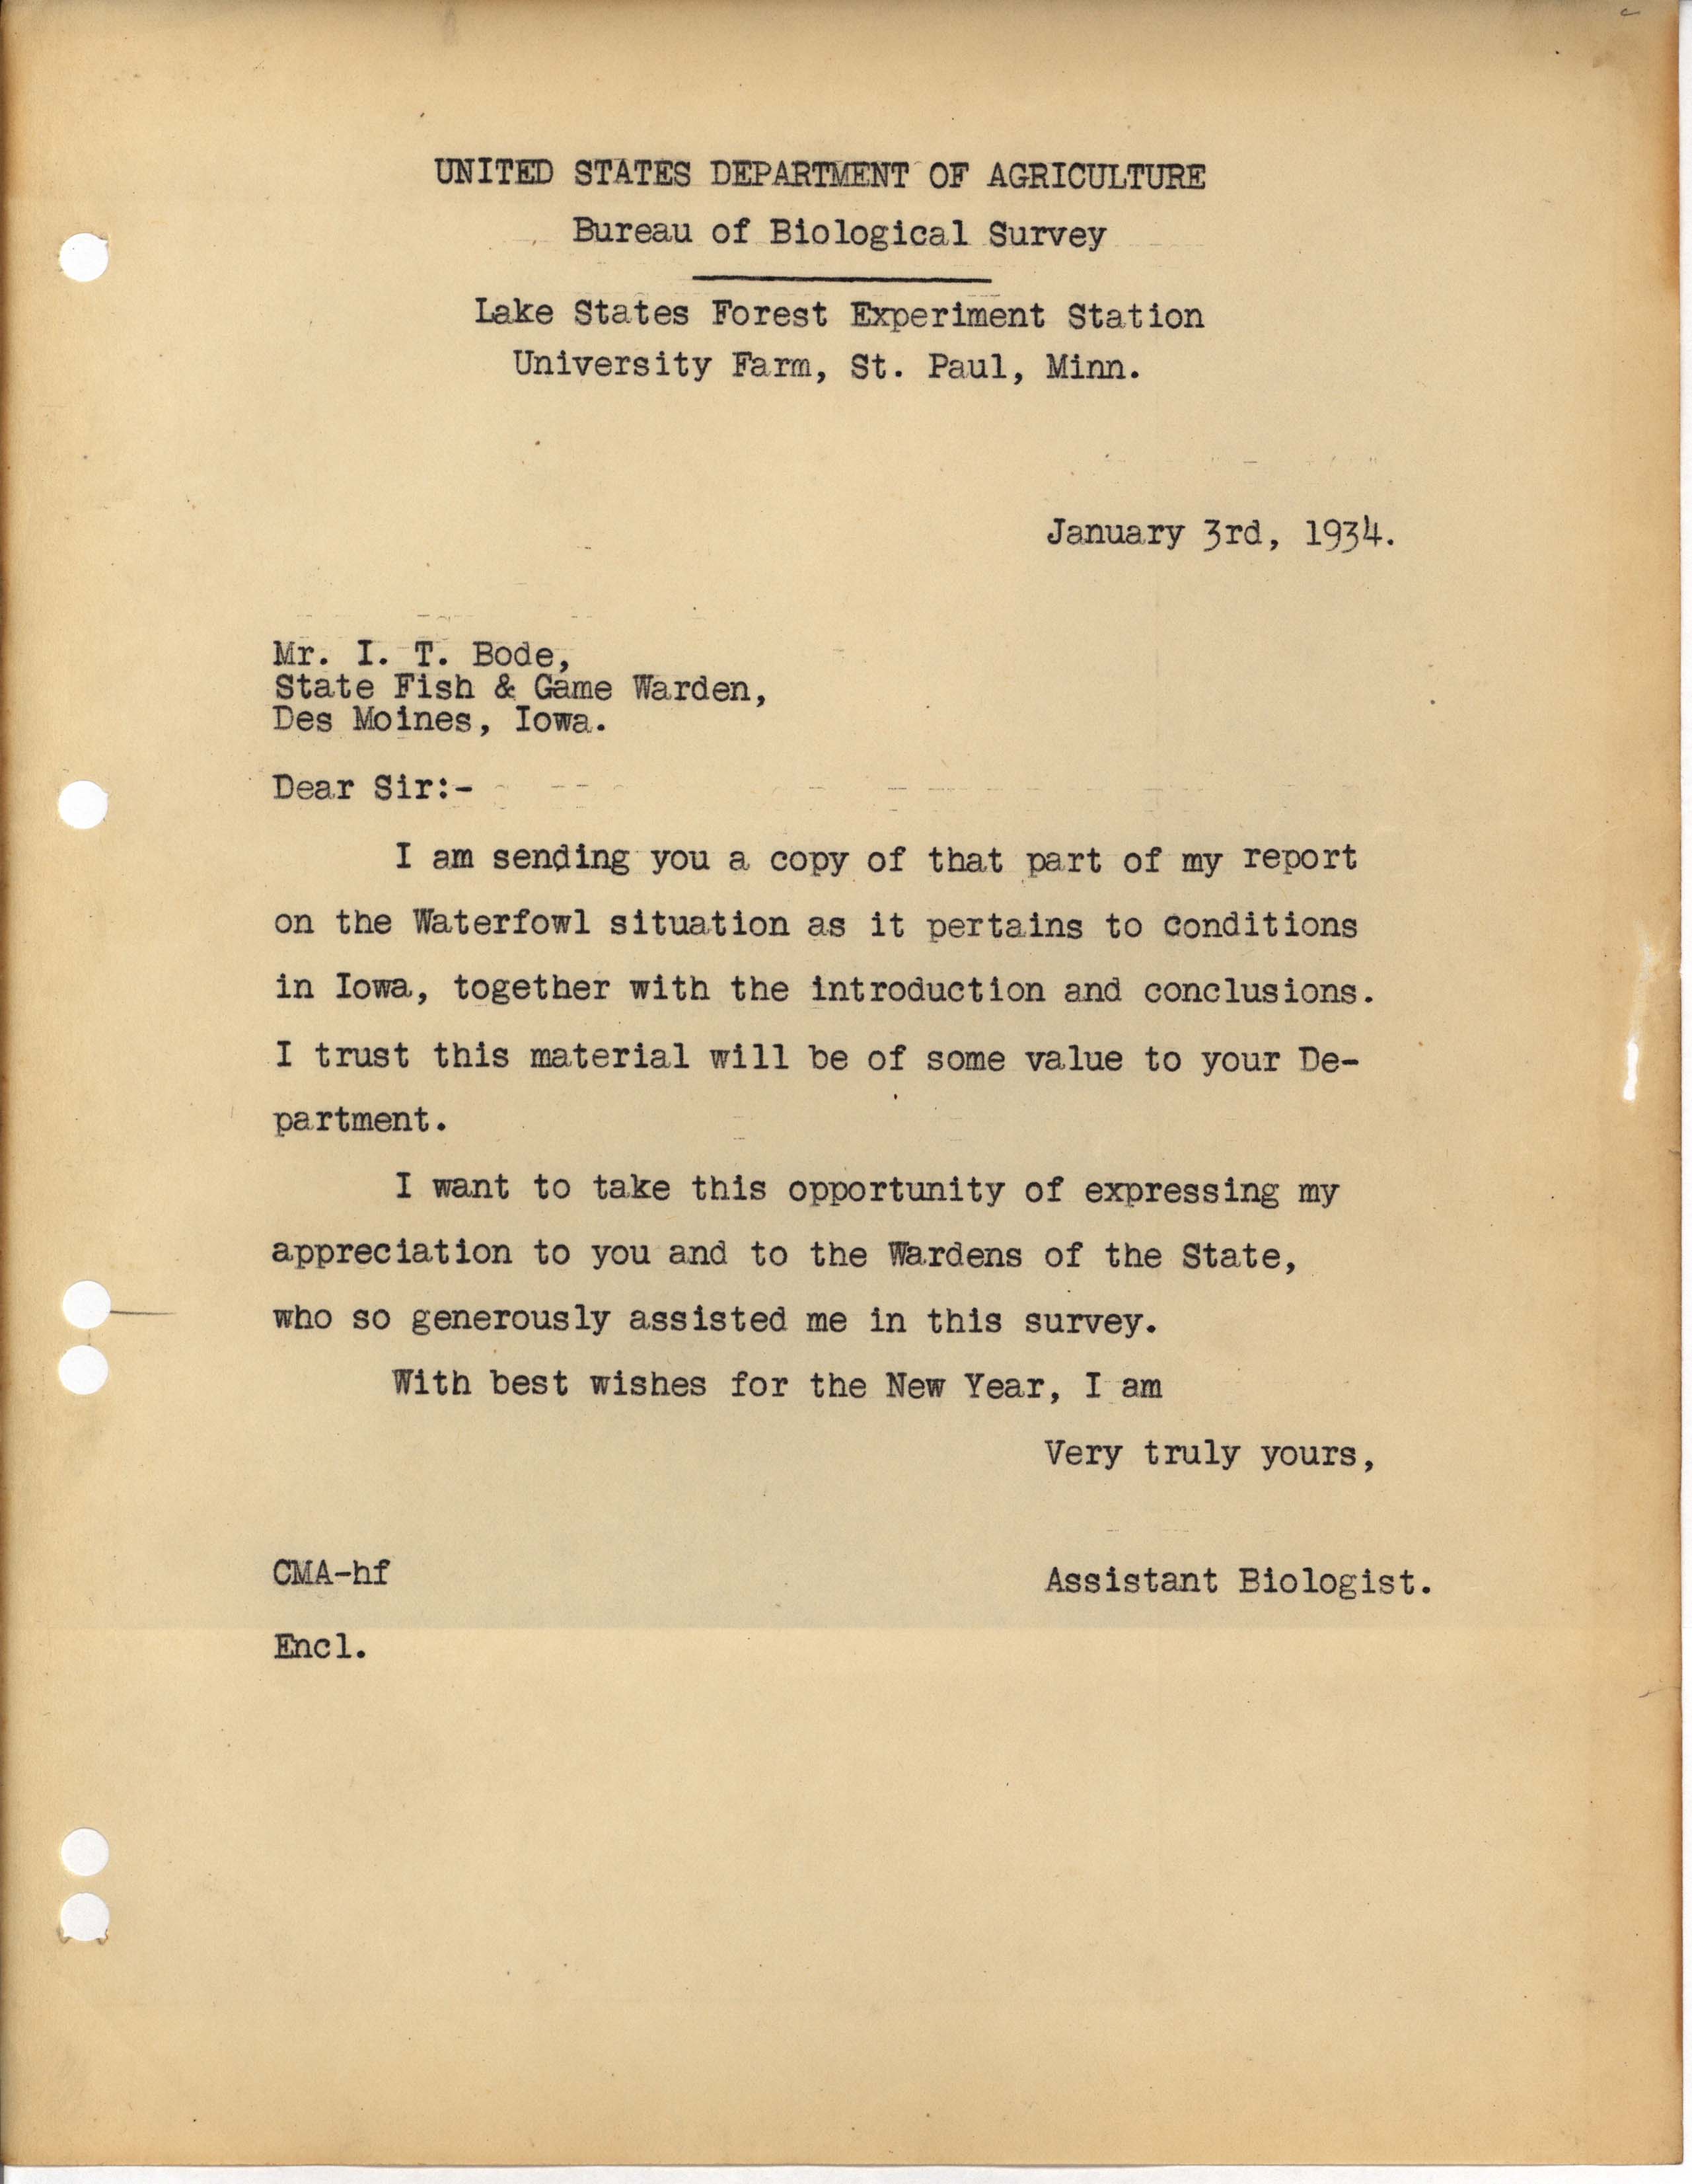 Letter to I.T. Bode regarding Waterfowl conditions that might affect Iowa, January 3, 1934